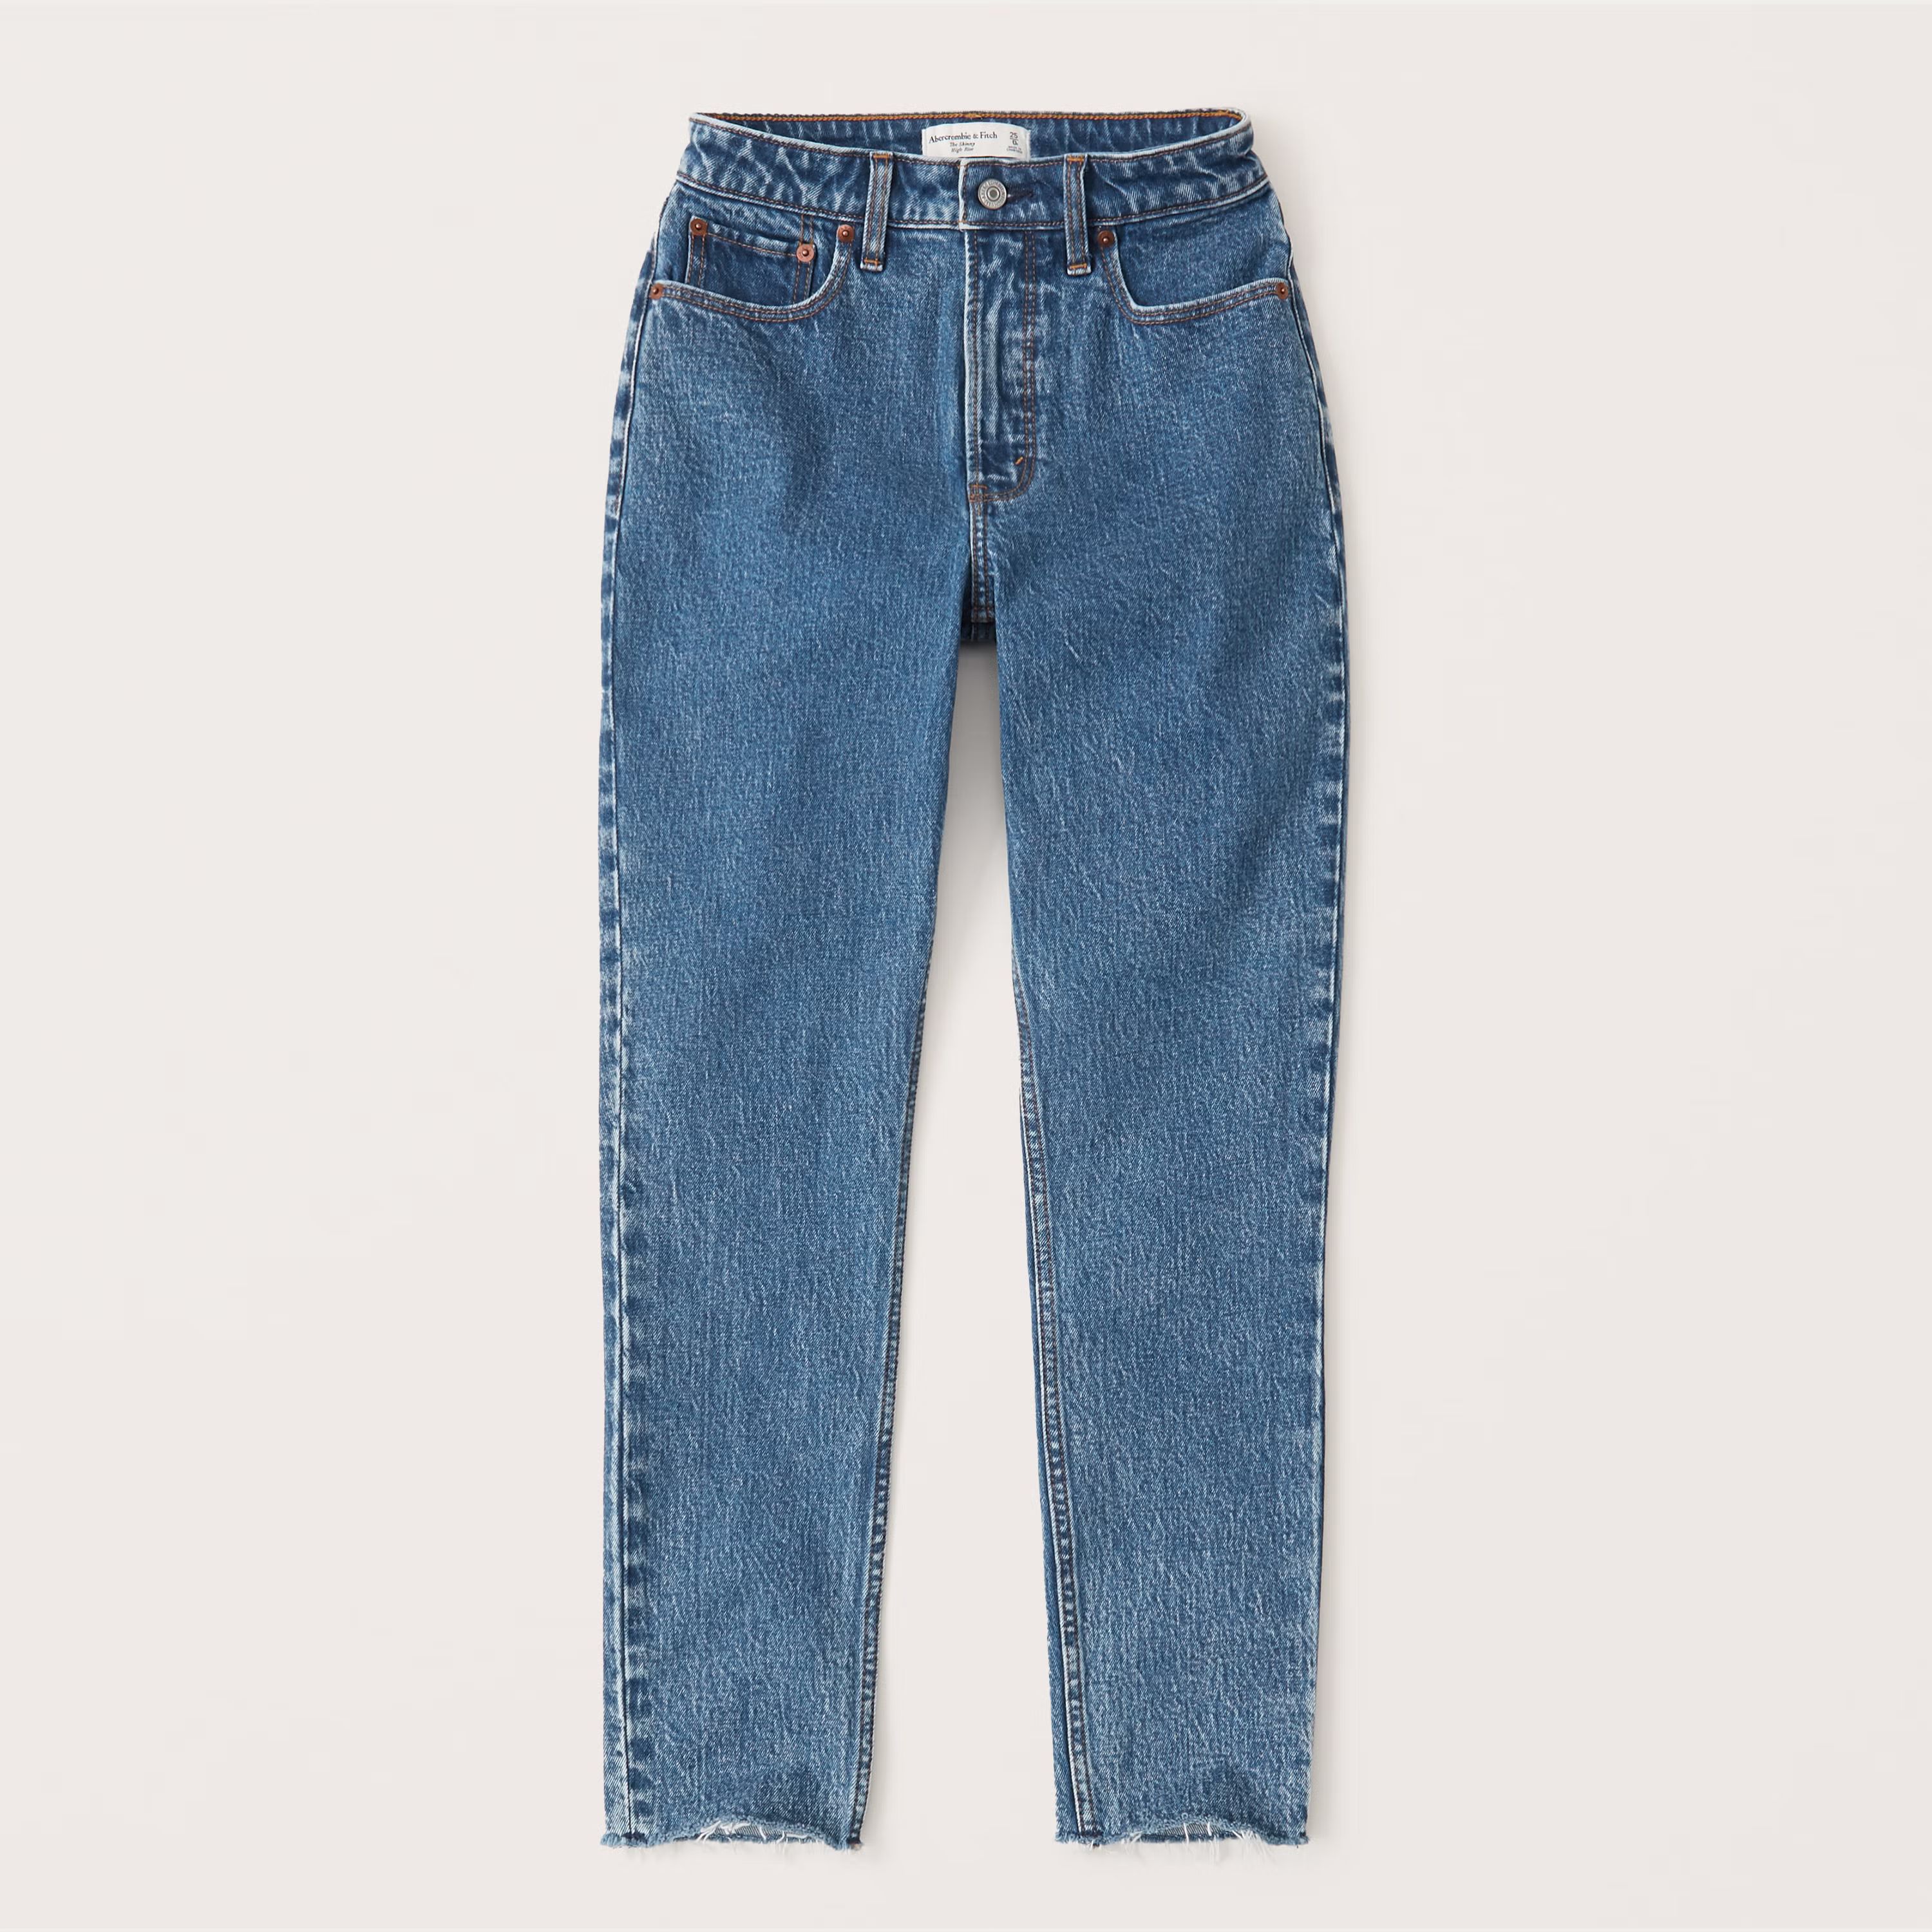 Women's Curve Love High Rise Skinny Jeans | Women's Bottoms | Abercrombie.com | Abercrombie & Fitch (US)